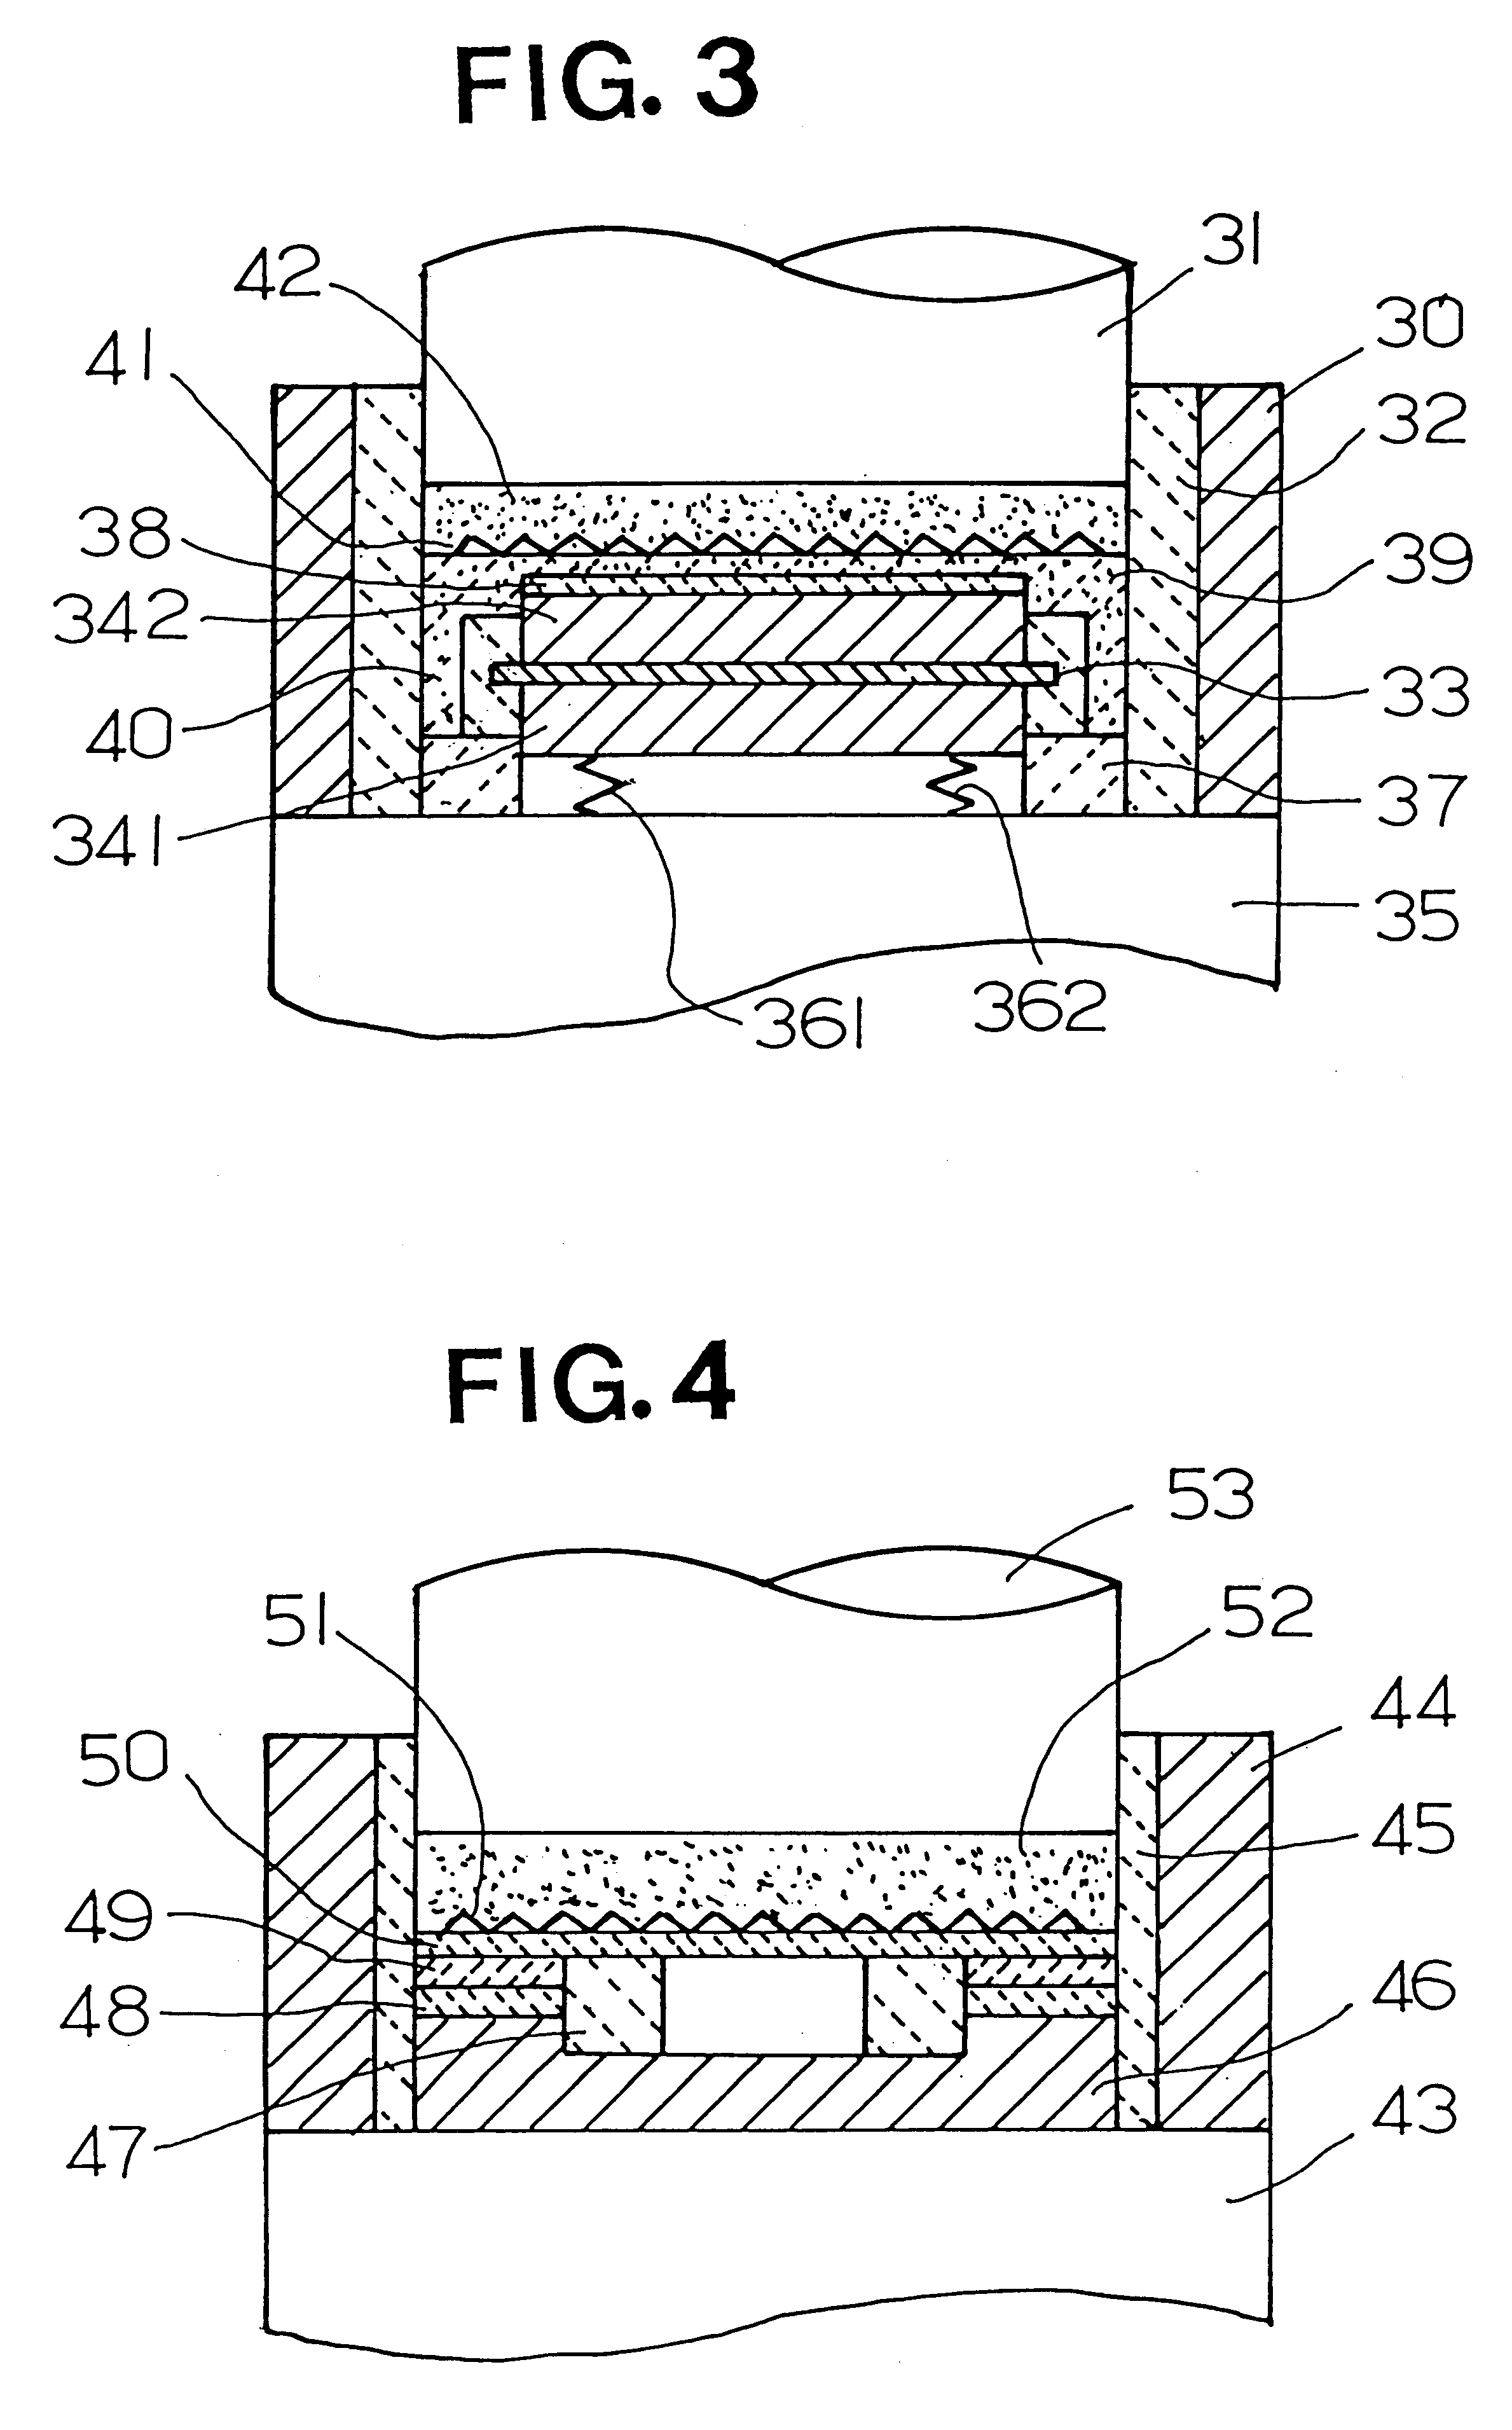 Super-abrasive grain-containing composite material and method of making